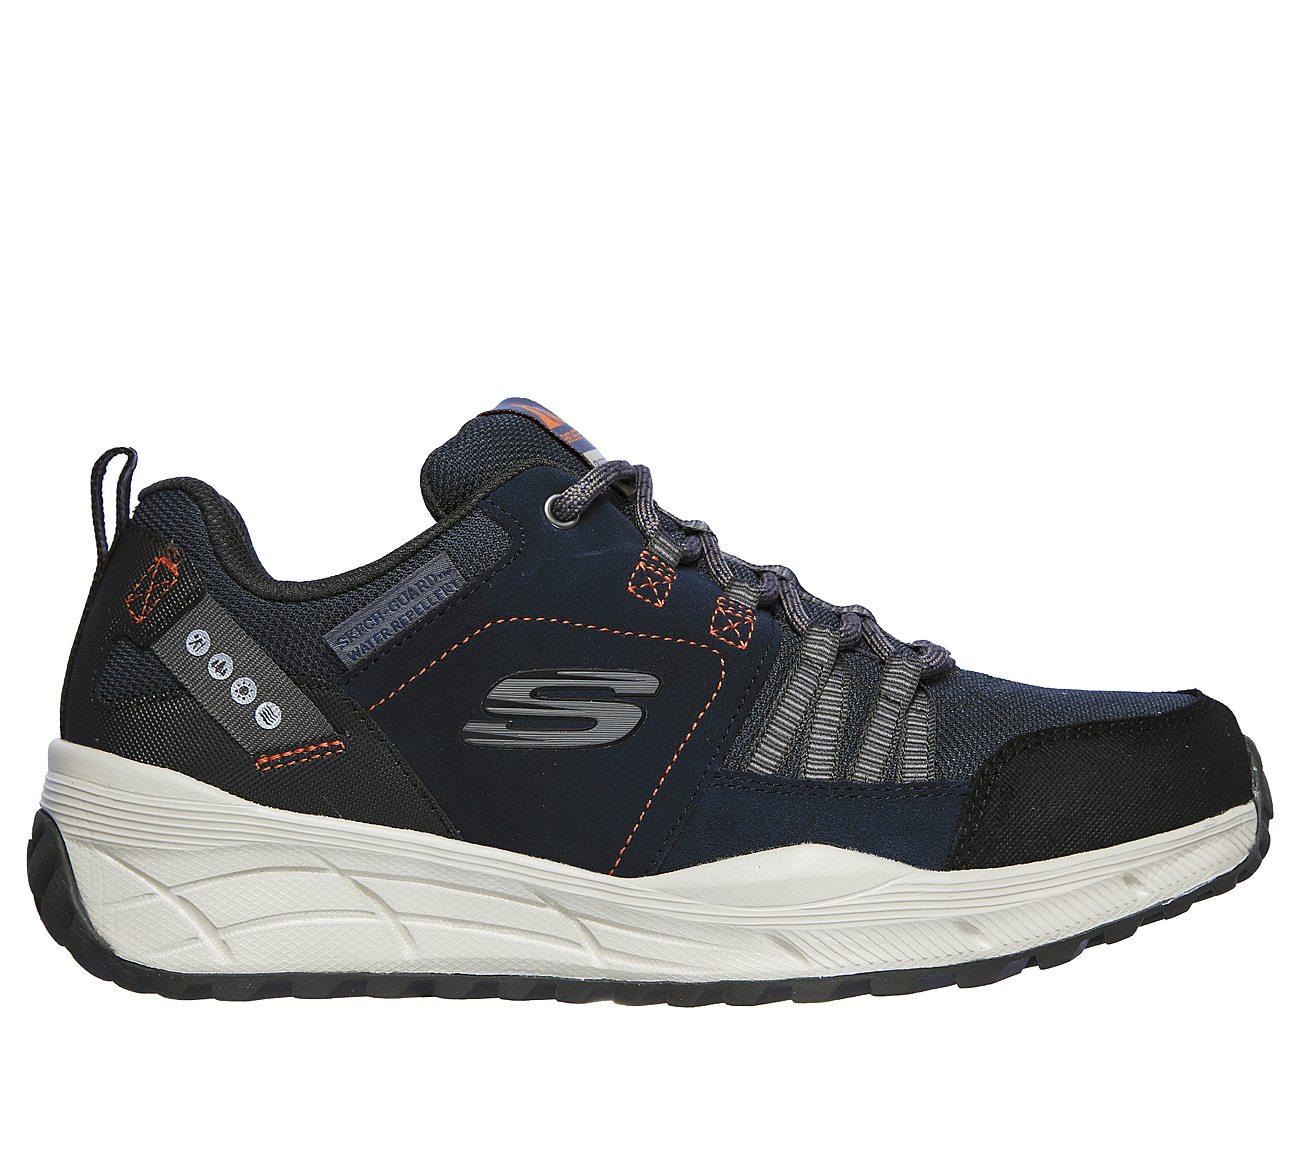 Buy SKECHERS Relaxed Fit: Equalizer 4.0 Trail Sport Shoes